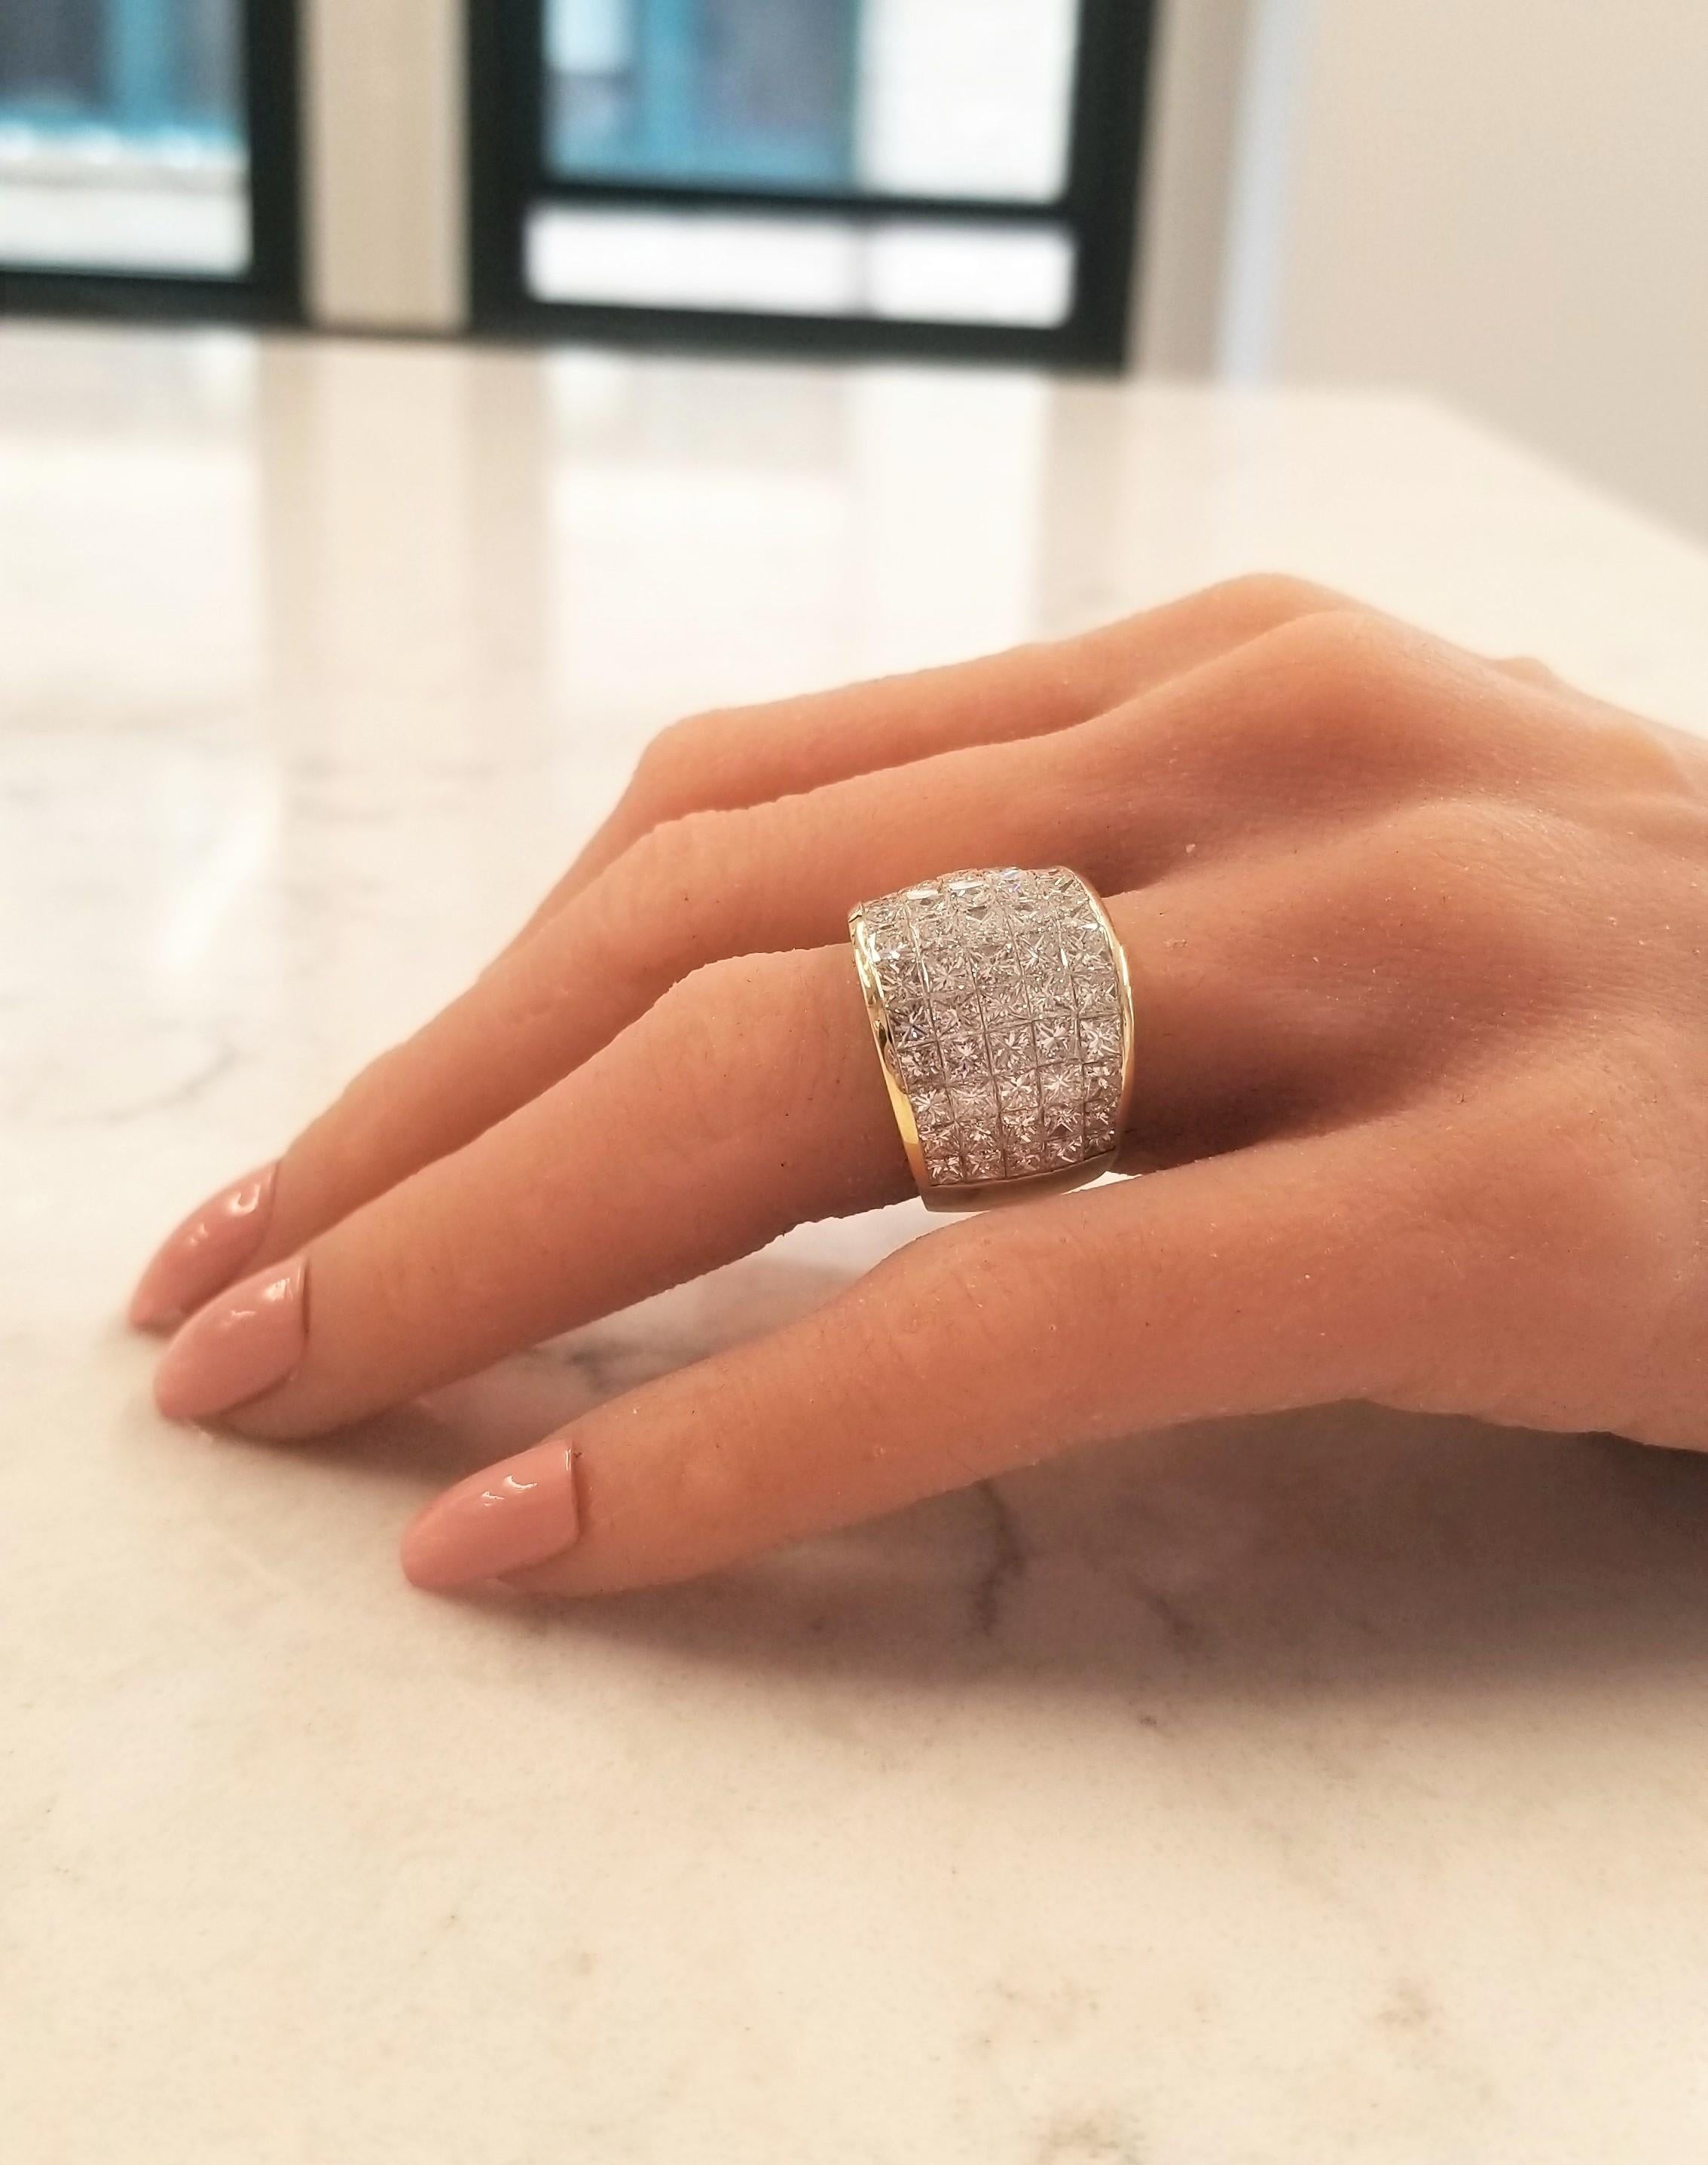 Diamonds for days! This extraordinary ring features five rows of sizzling invisible set diamonds. It sets your style ablaze with sparkle and a luxurious piece of jewelry. Truly, no eye will be able to resist indulging in a peek at this incredible